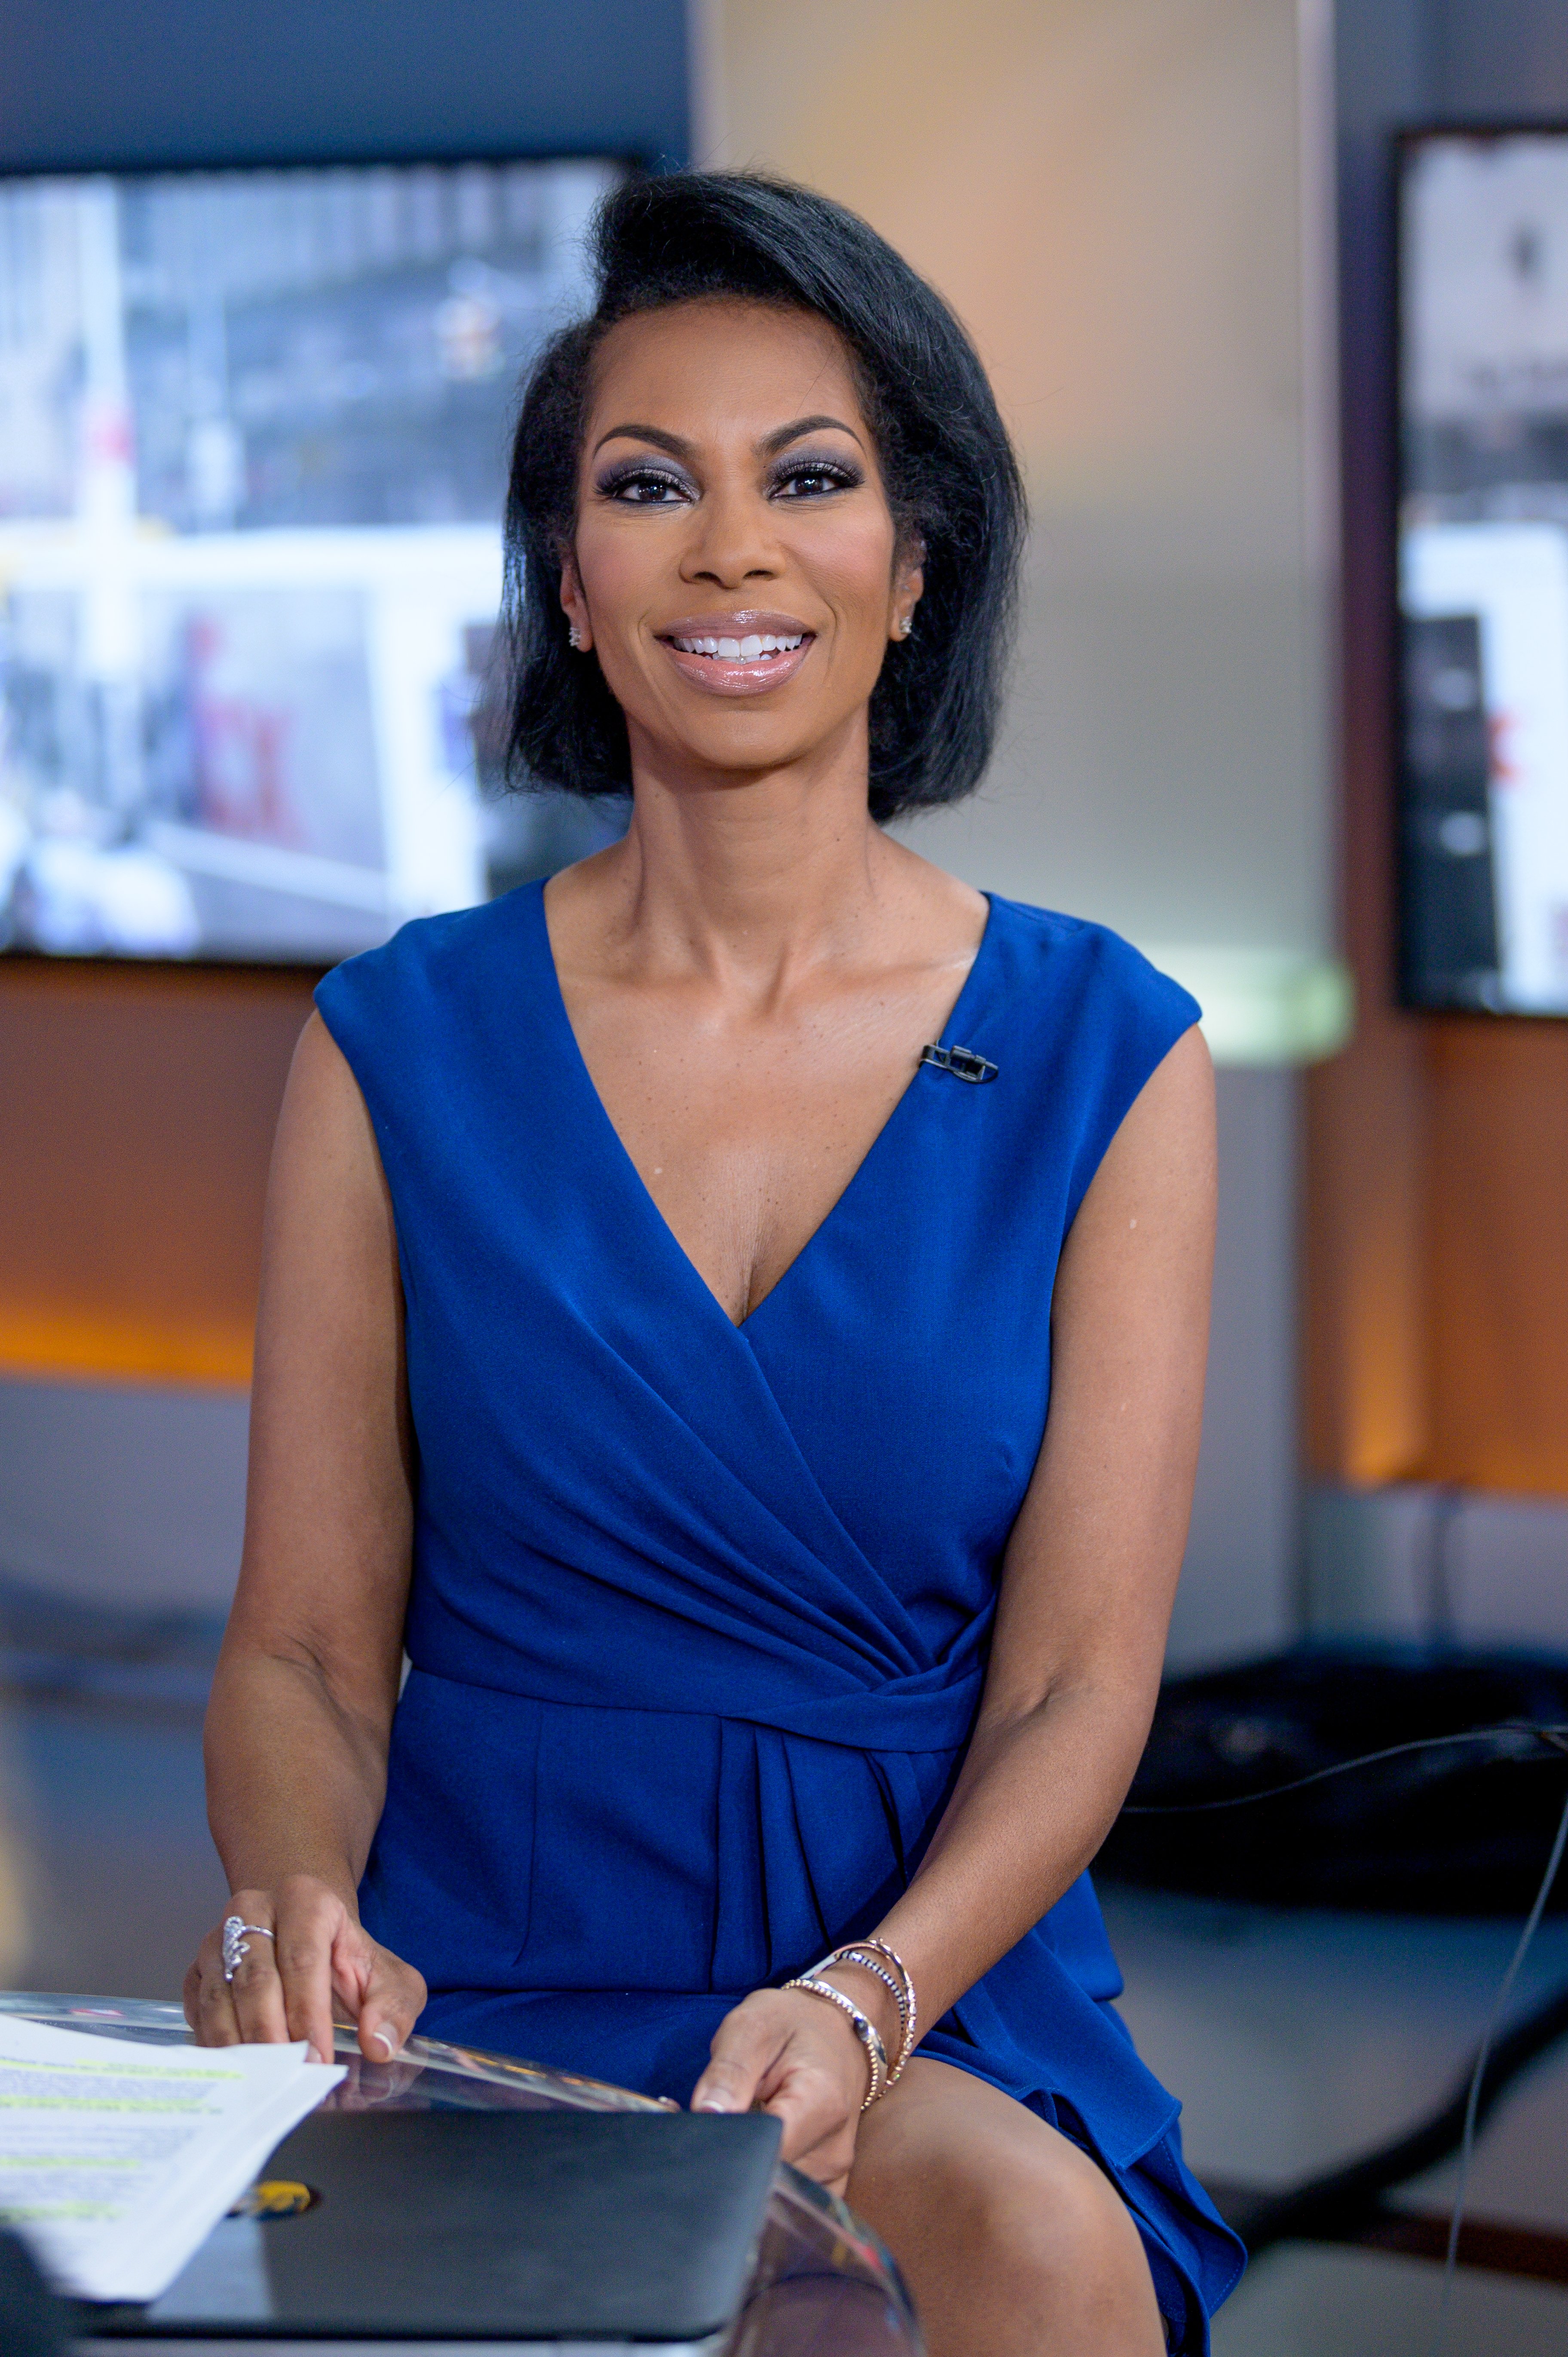  Harris Faulkner visits "Outnumbered Overtime" on September 18, 2019, in New York City. | Source: Getty Images.